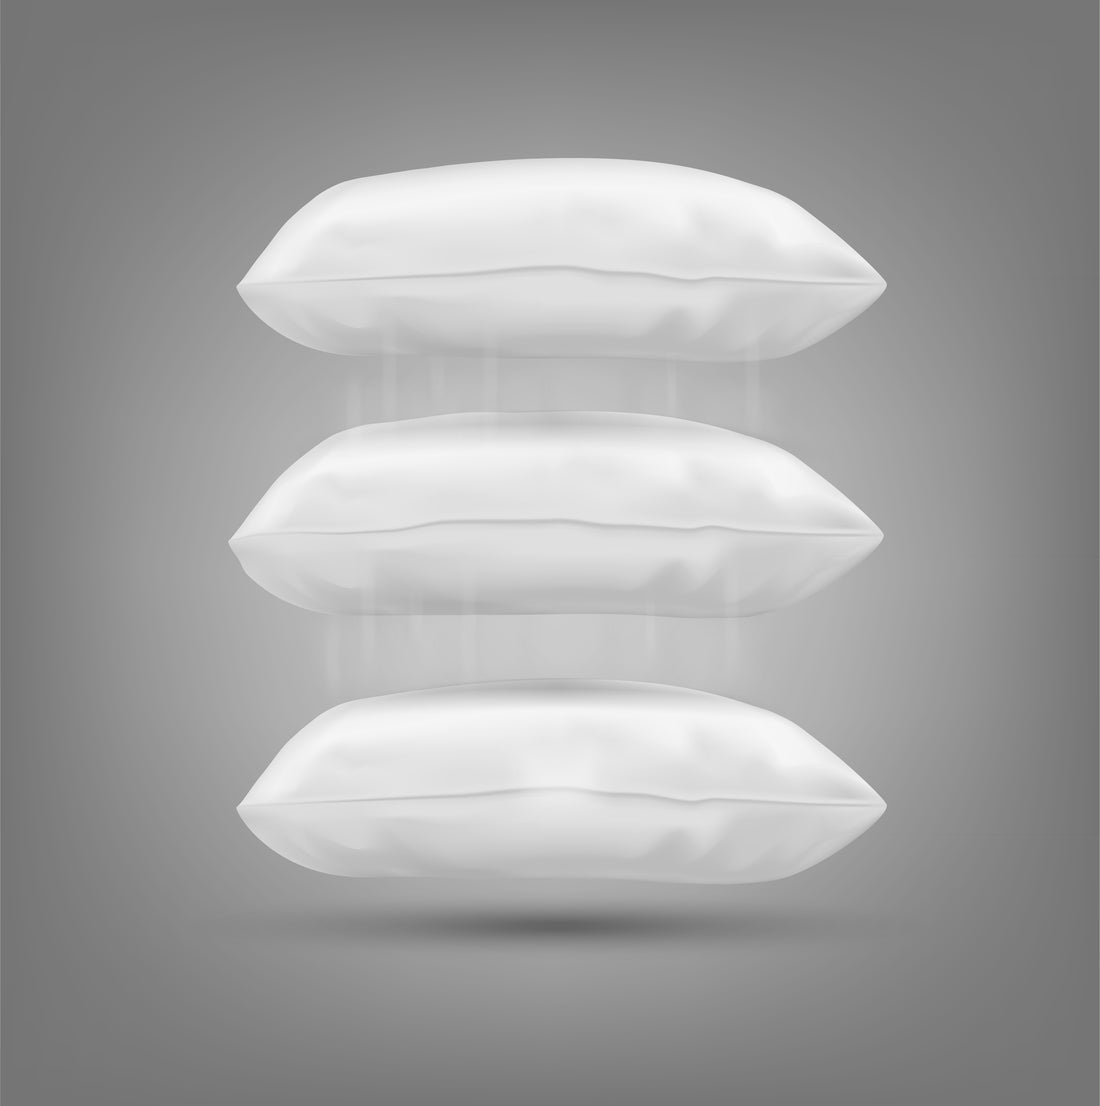 "Silk Pillowcase Care 101: Essential Tips for Luxurious and Long-Lasting Beauty Sleep"